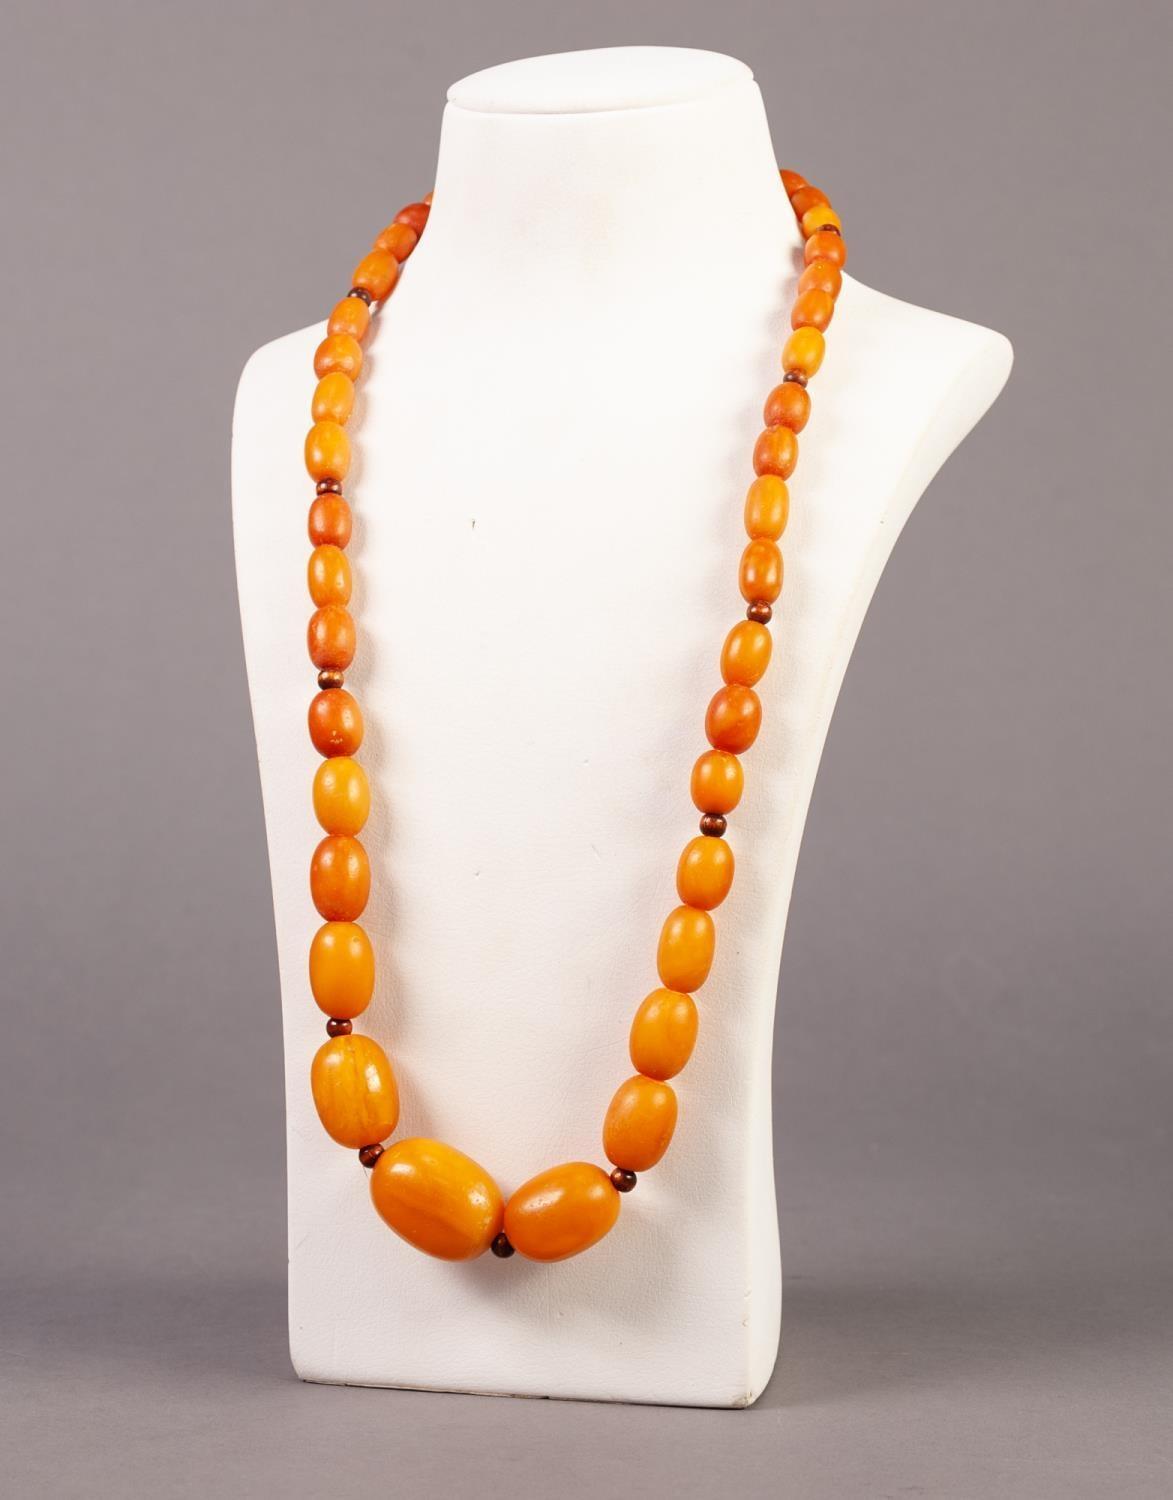 SINGLE STRAND NECKLACE OF BUTTERSCOTCH AMBER GRADUATED OVAL BEADS, with screw clasp, 25" (63.5cm)